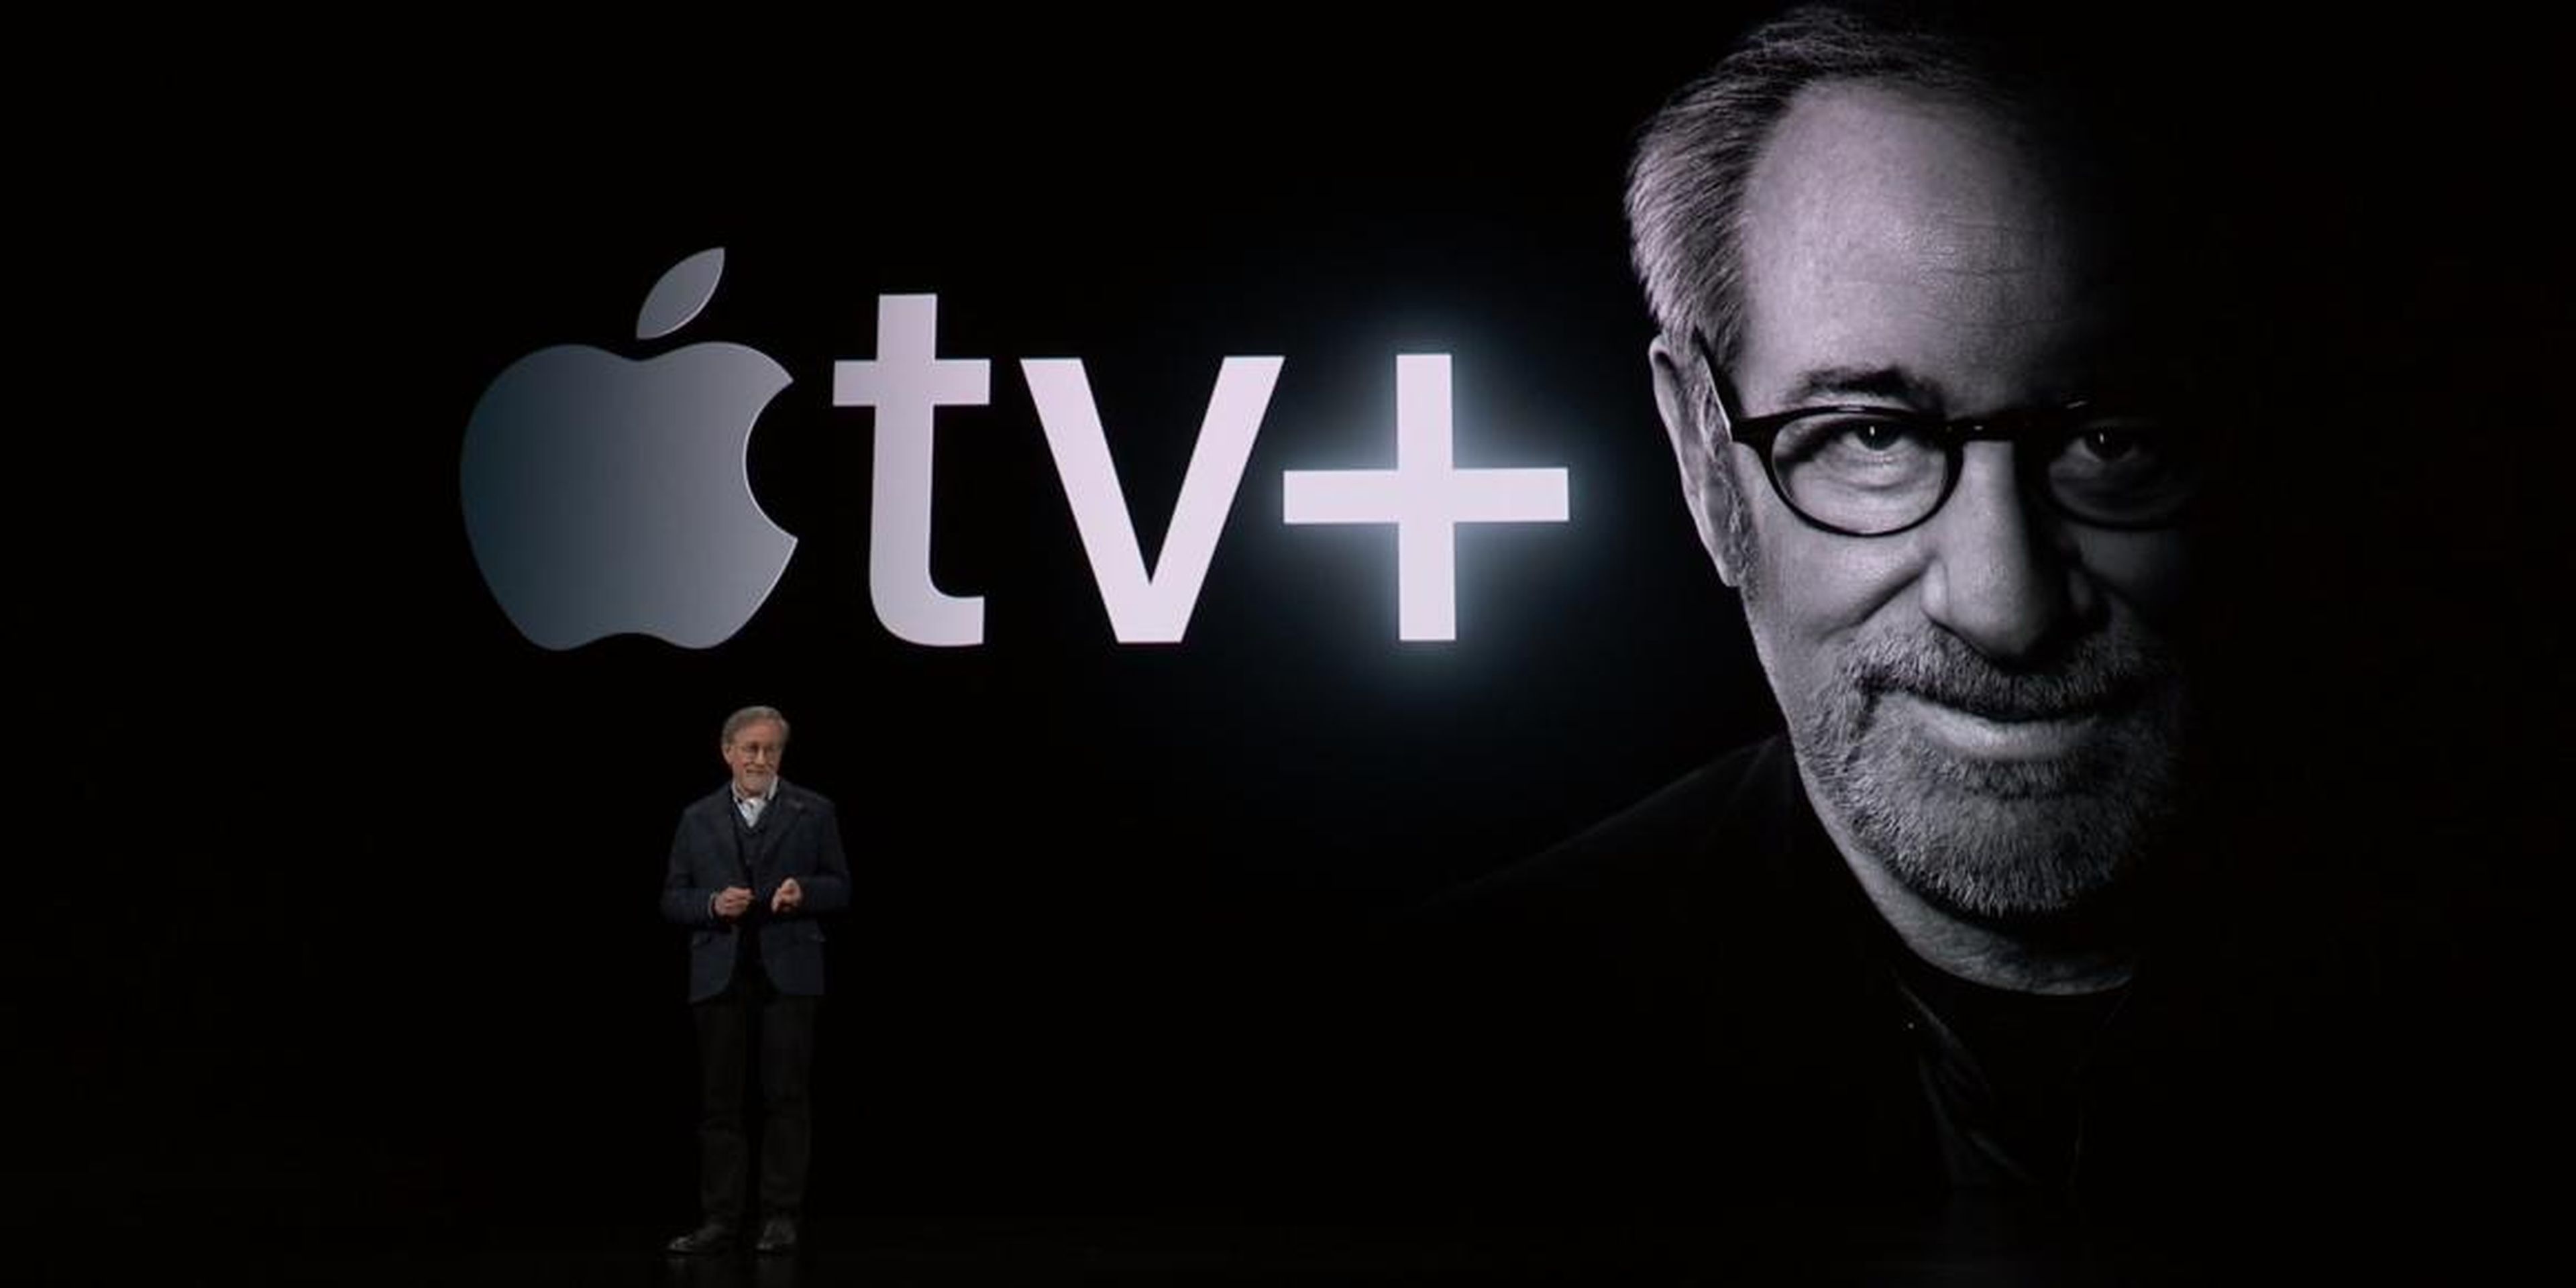 Acclaimed filmmaker Steven Spielberg appeared on stage during the unveiling of Apple TV Plus. He's heading up a reboot of the "Amazing Stories" TV series.